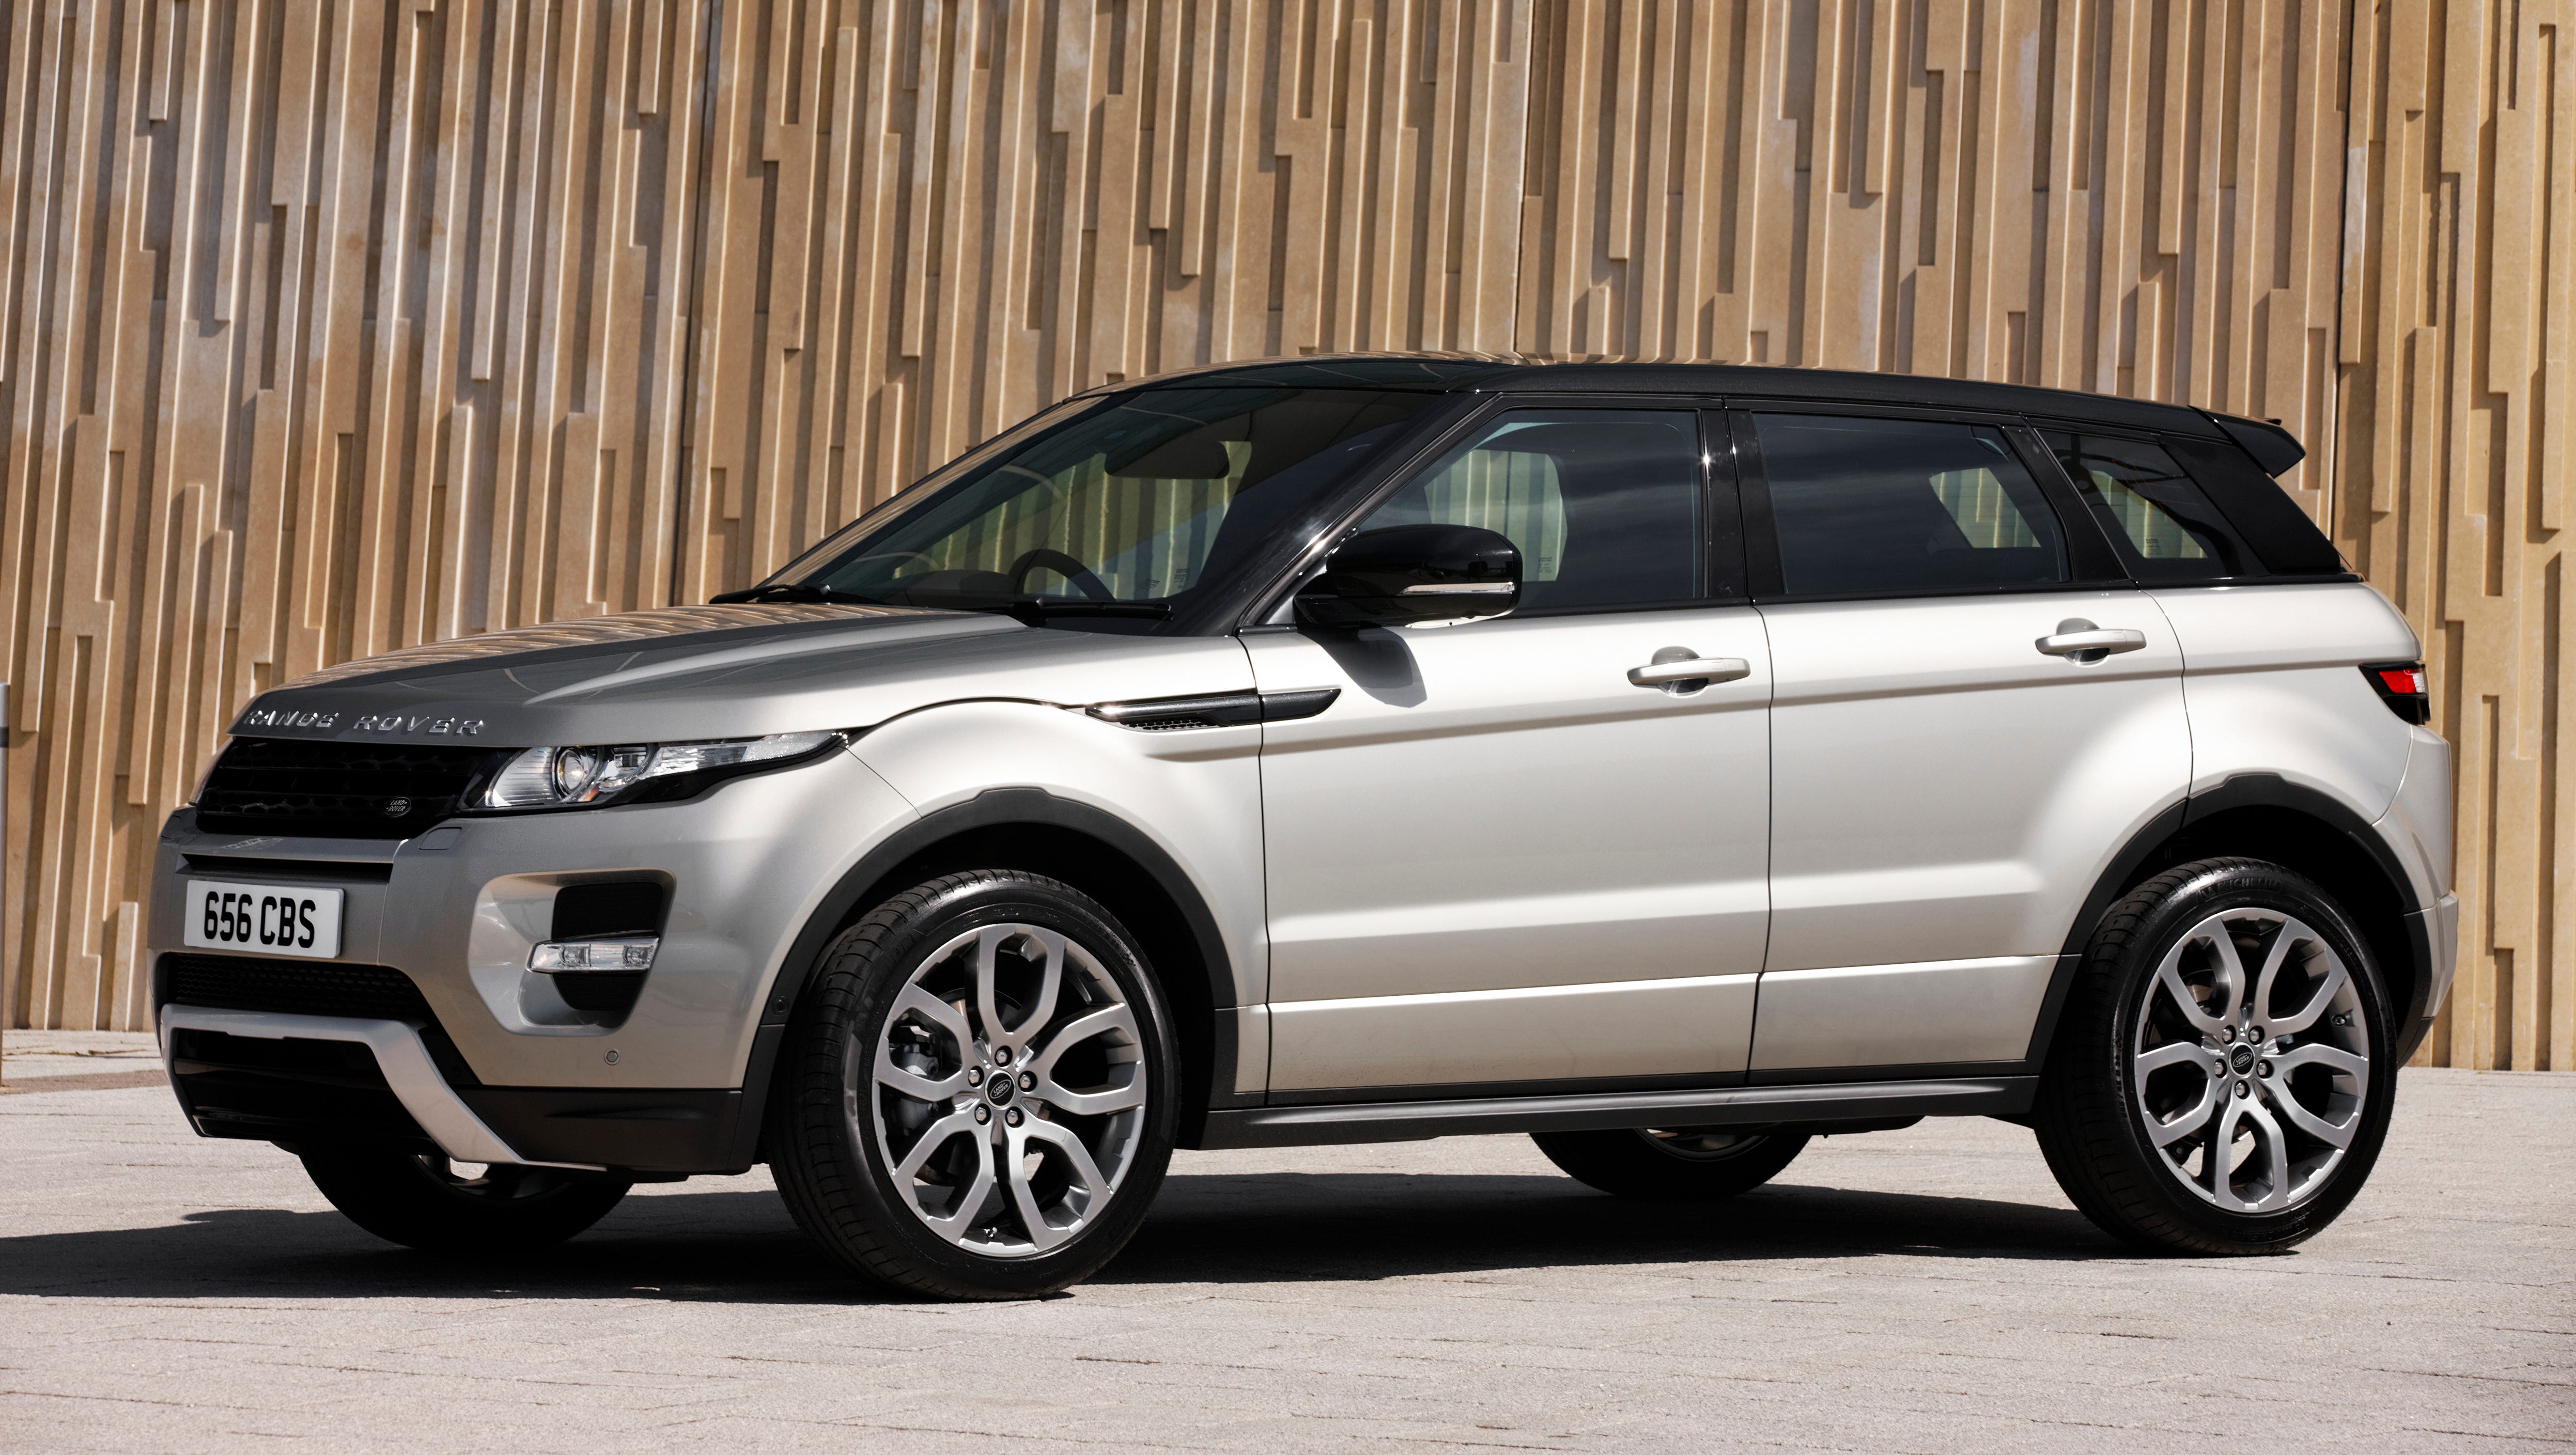 bloed Opstand Excursie Auto review: 2015 Range Rover Evoque is well-behaved on drive to French  Lick Concours d'Elegance